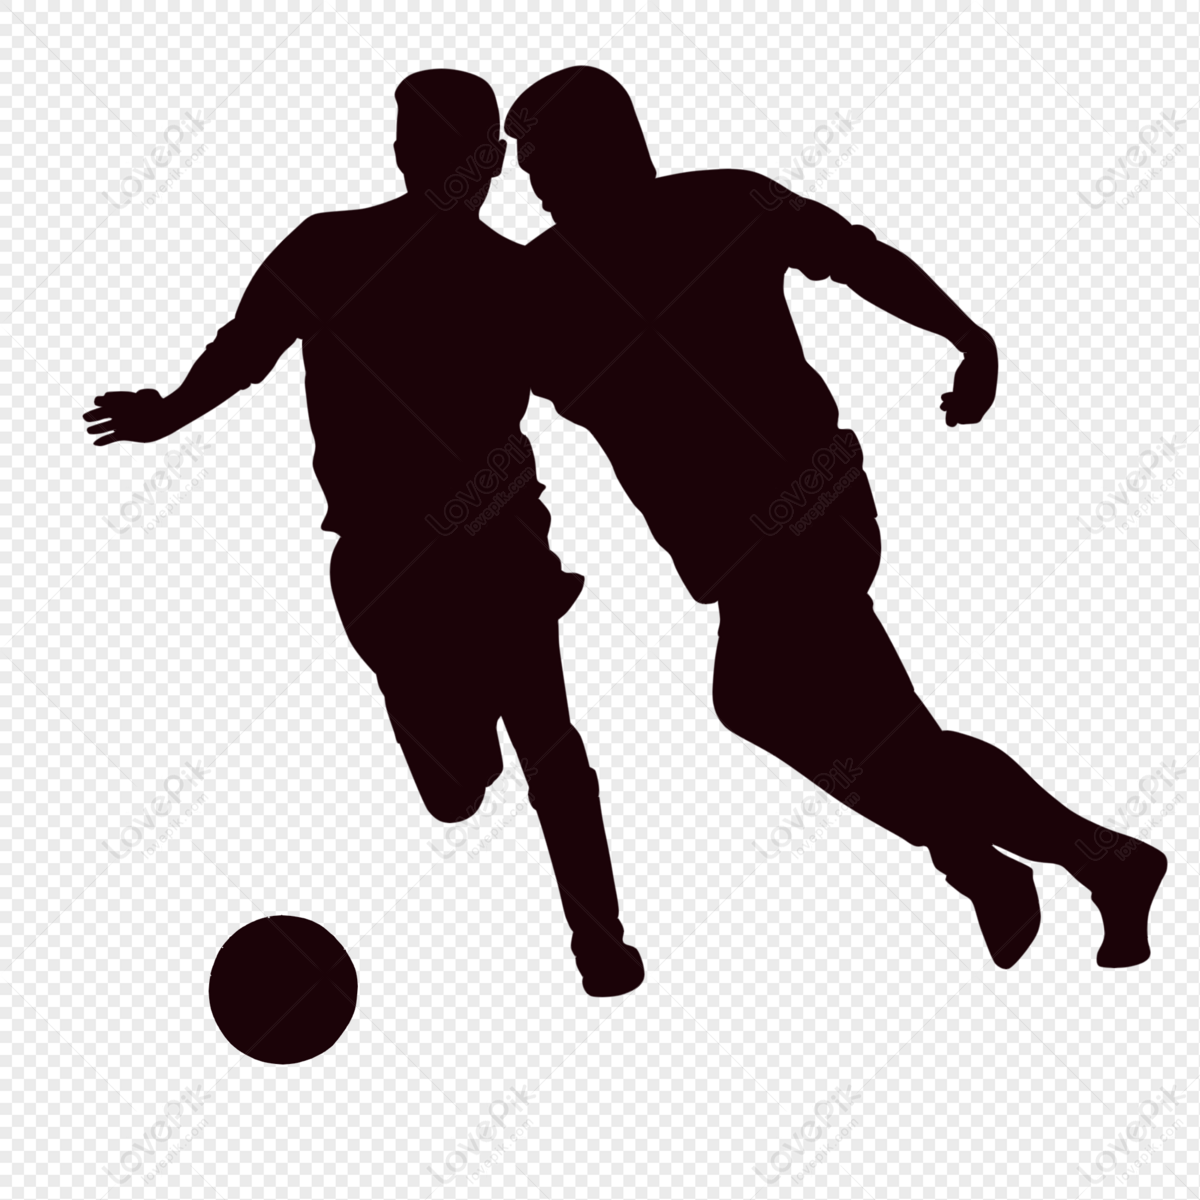 Soccer players dynamic football athletes poses Vector Image